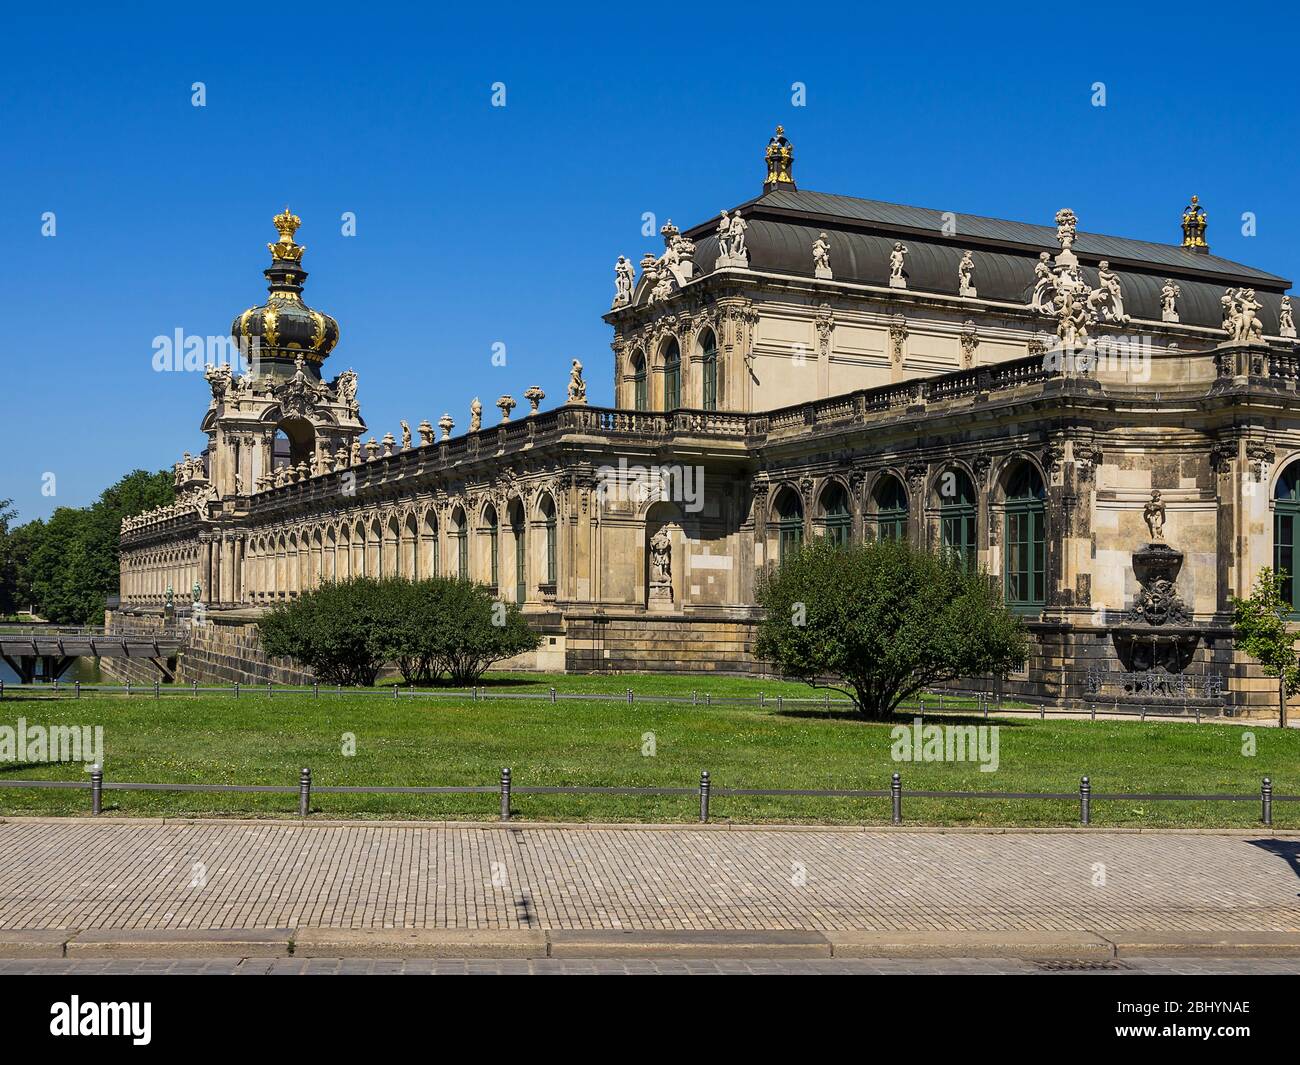 The Zwinger Palace with the Kronentor Gate in the city of Dresden, Saxony, Germany. Stock Photo